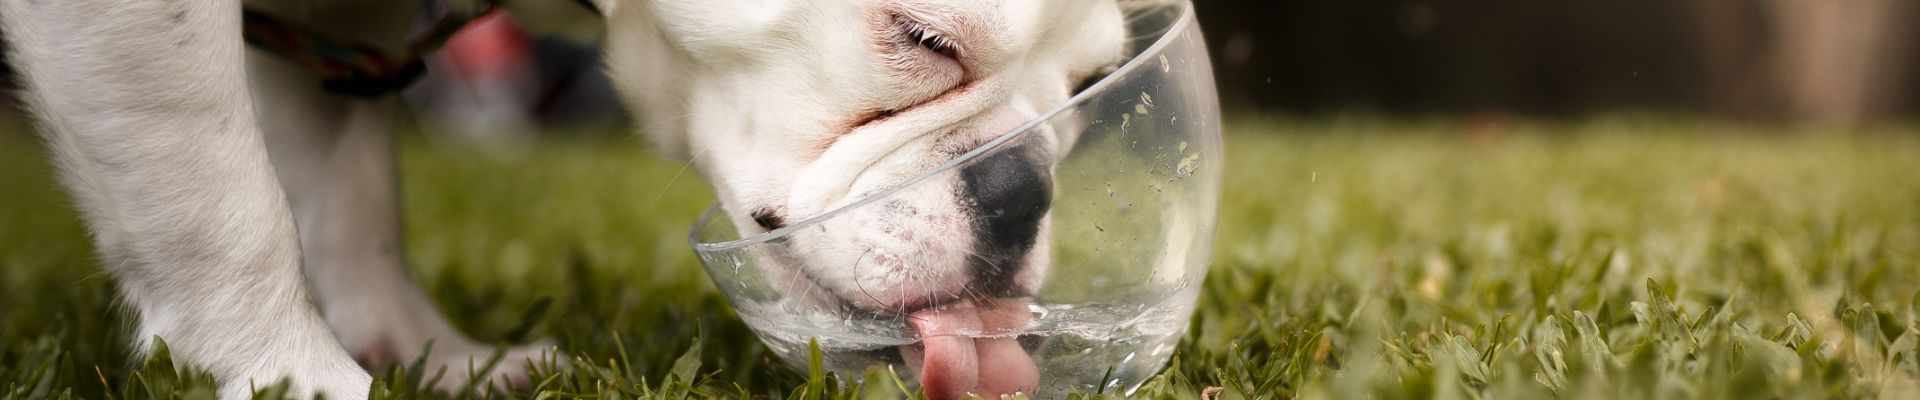 A dog drinking water from a clear bowl